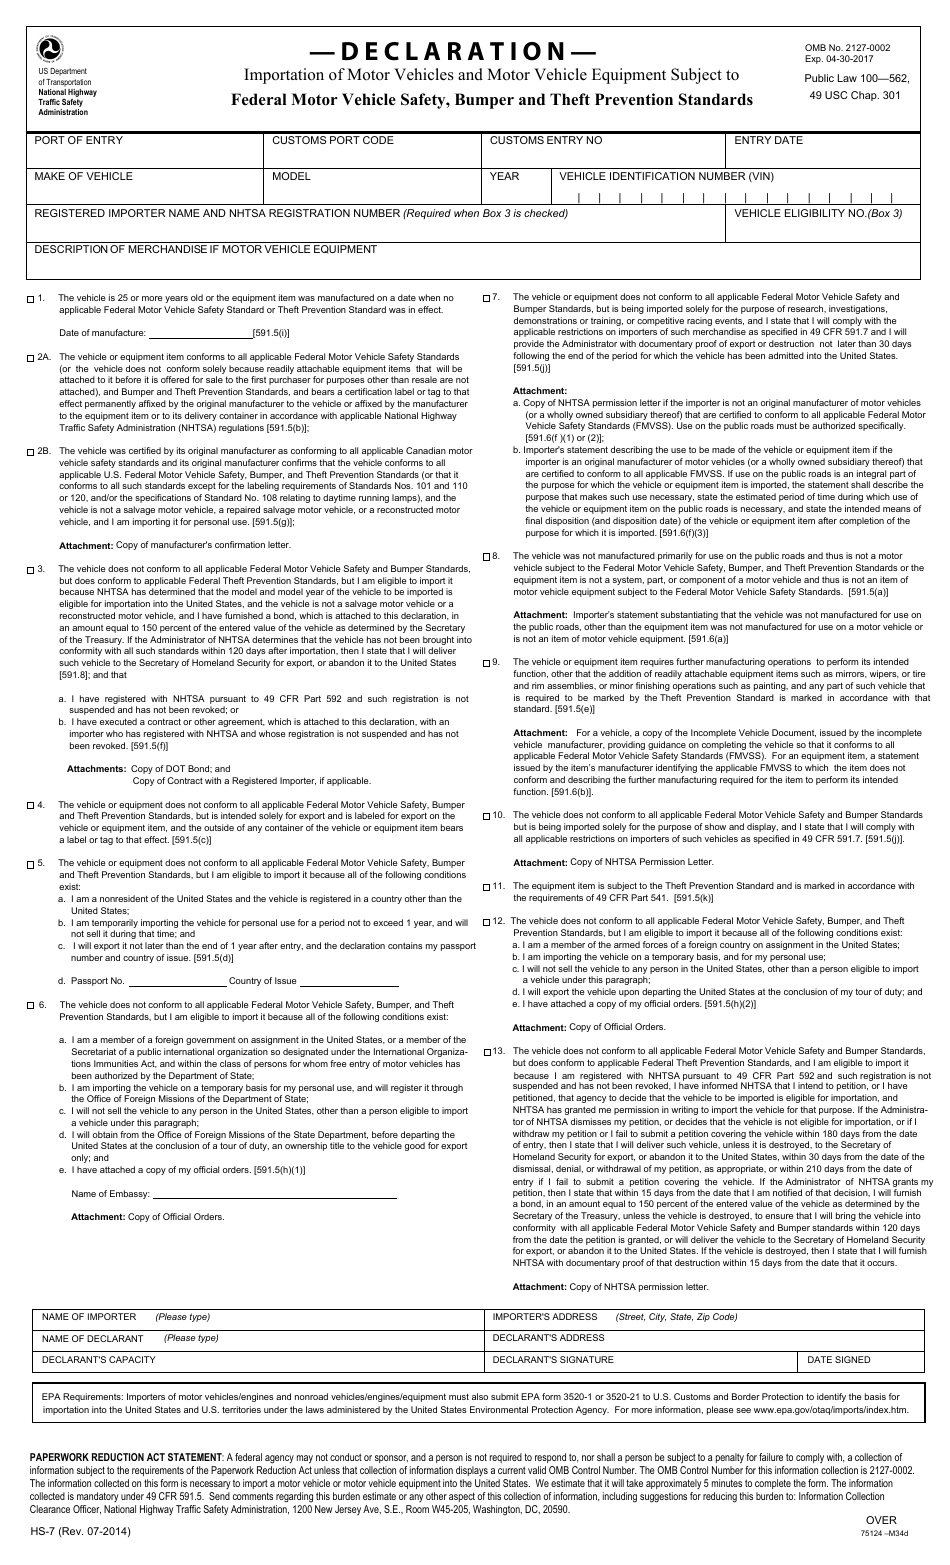 Form HS-7 Declaration of Importation of Motor Vehicles and Motor Vehicle Equipment Subject to Federal Motor Vehicle Safety, Bumper and Theft Prevention Standards, Page 1